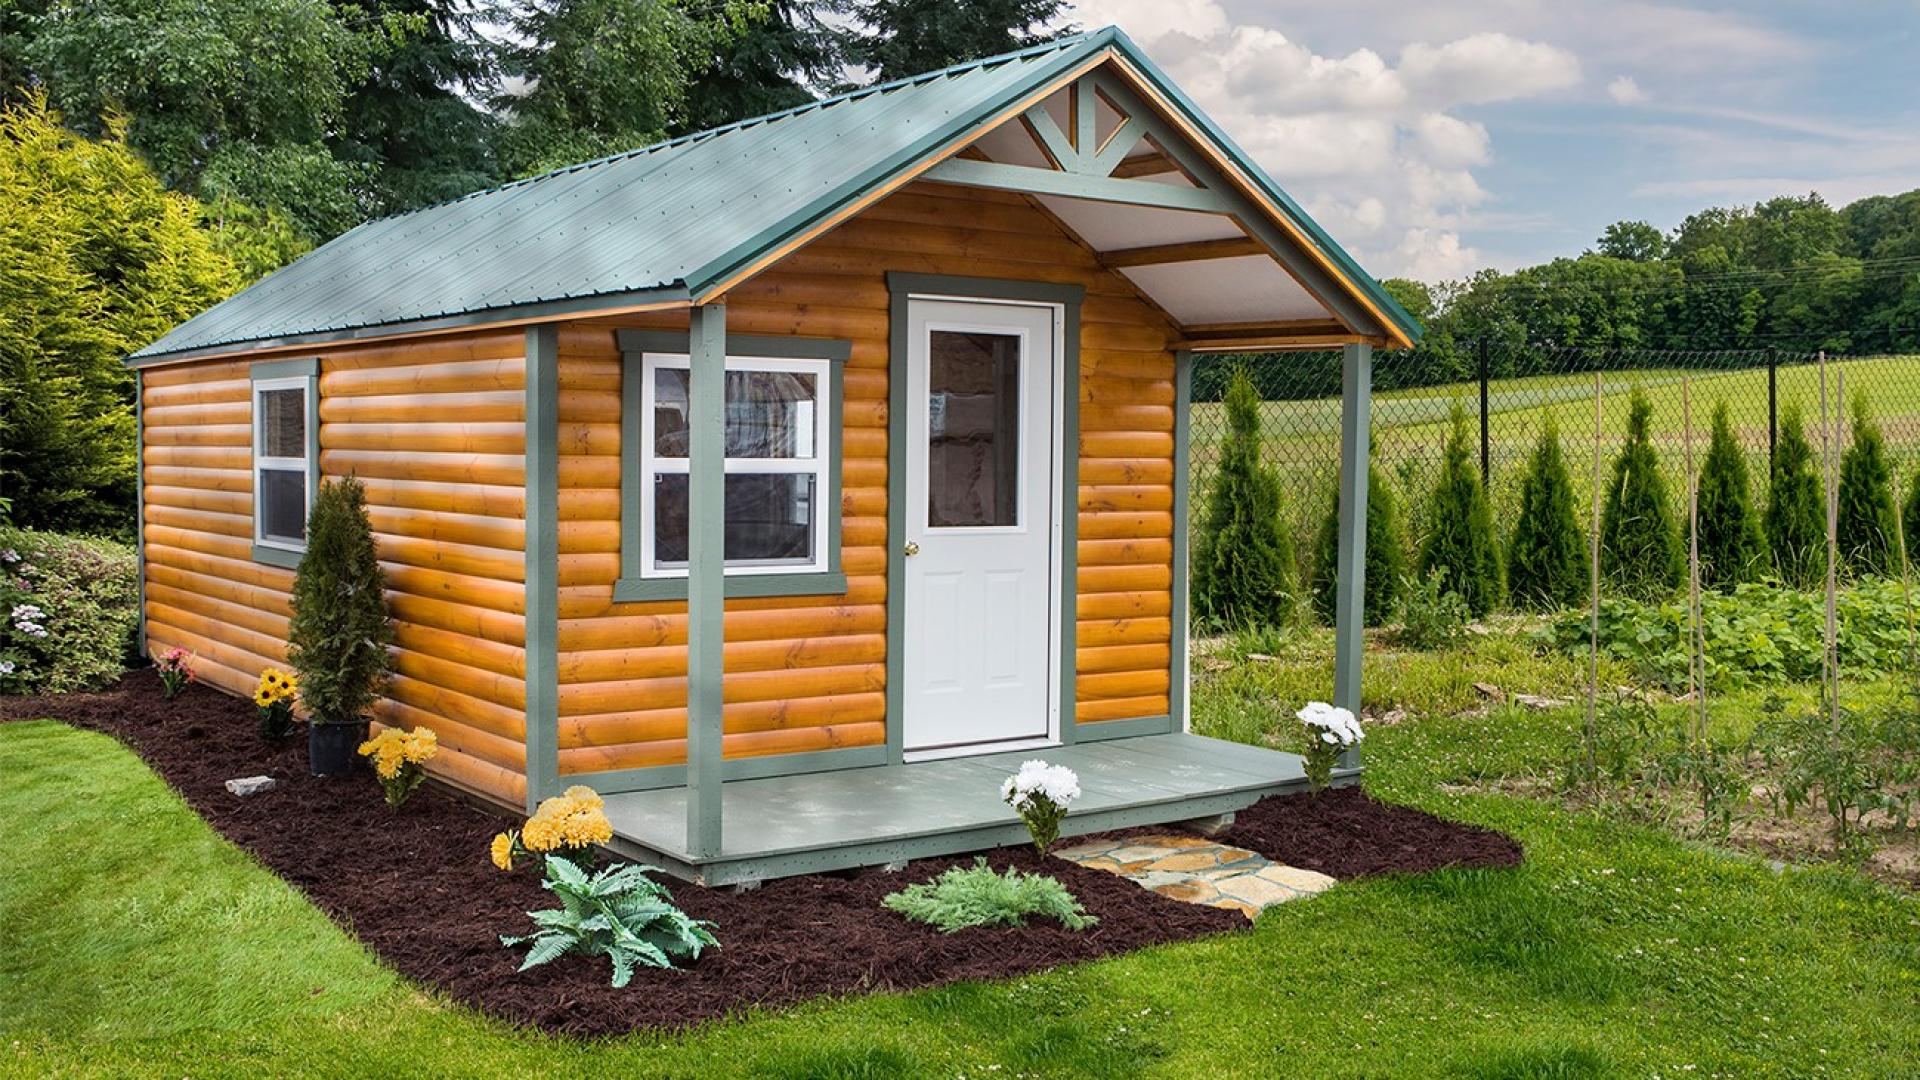 Brown hunting cabin with green roof and trim